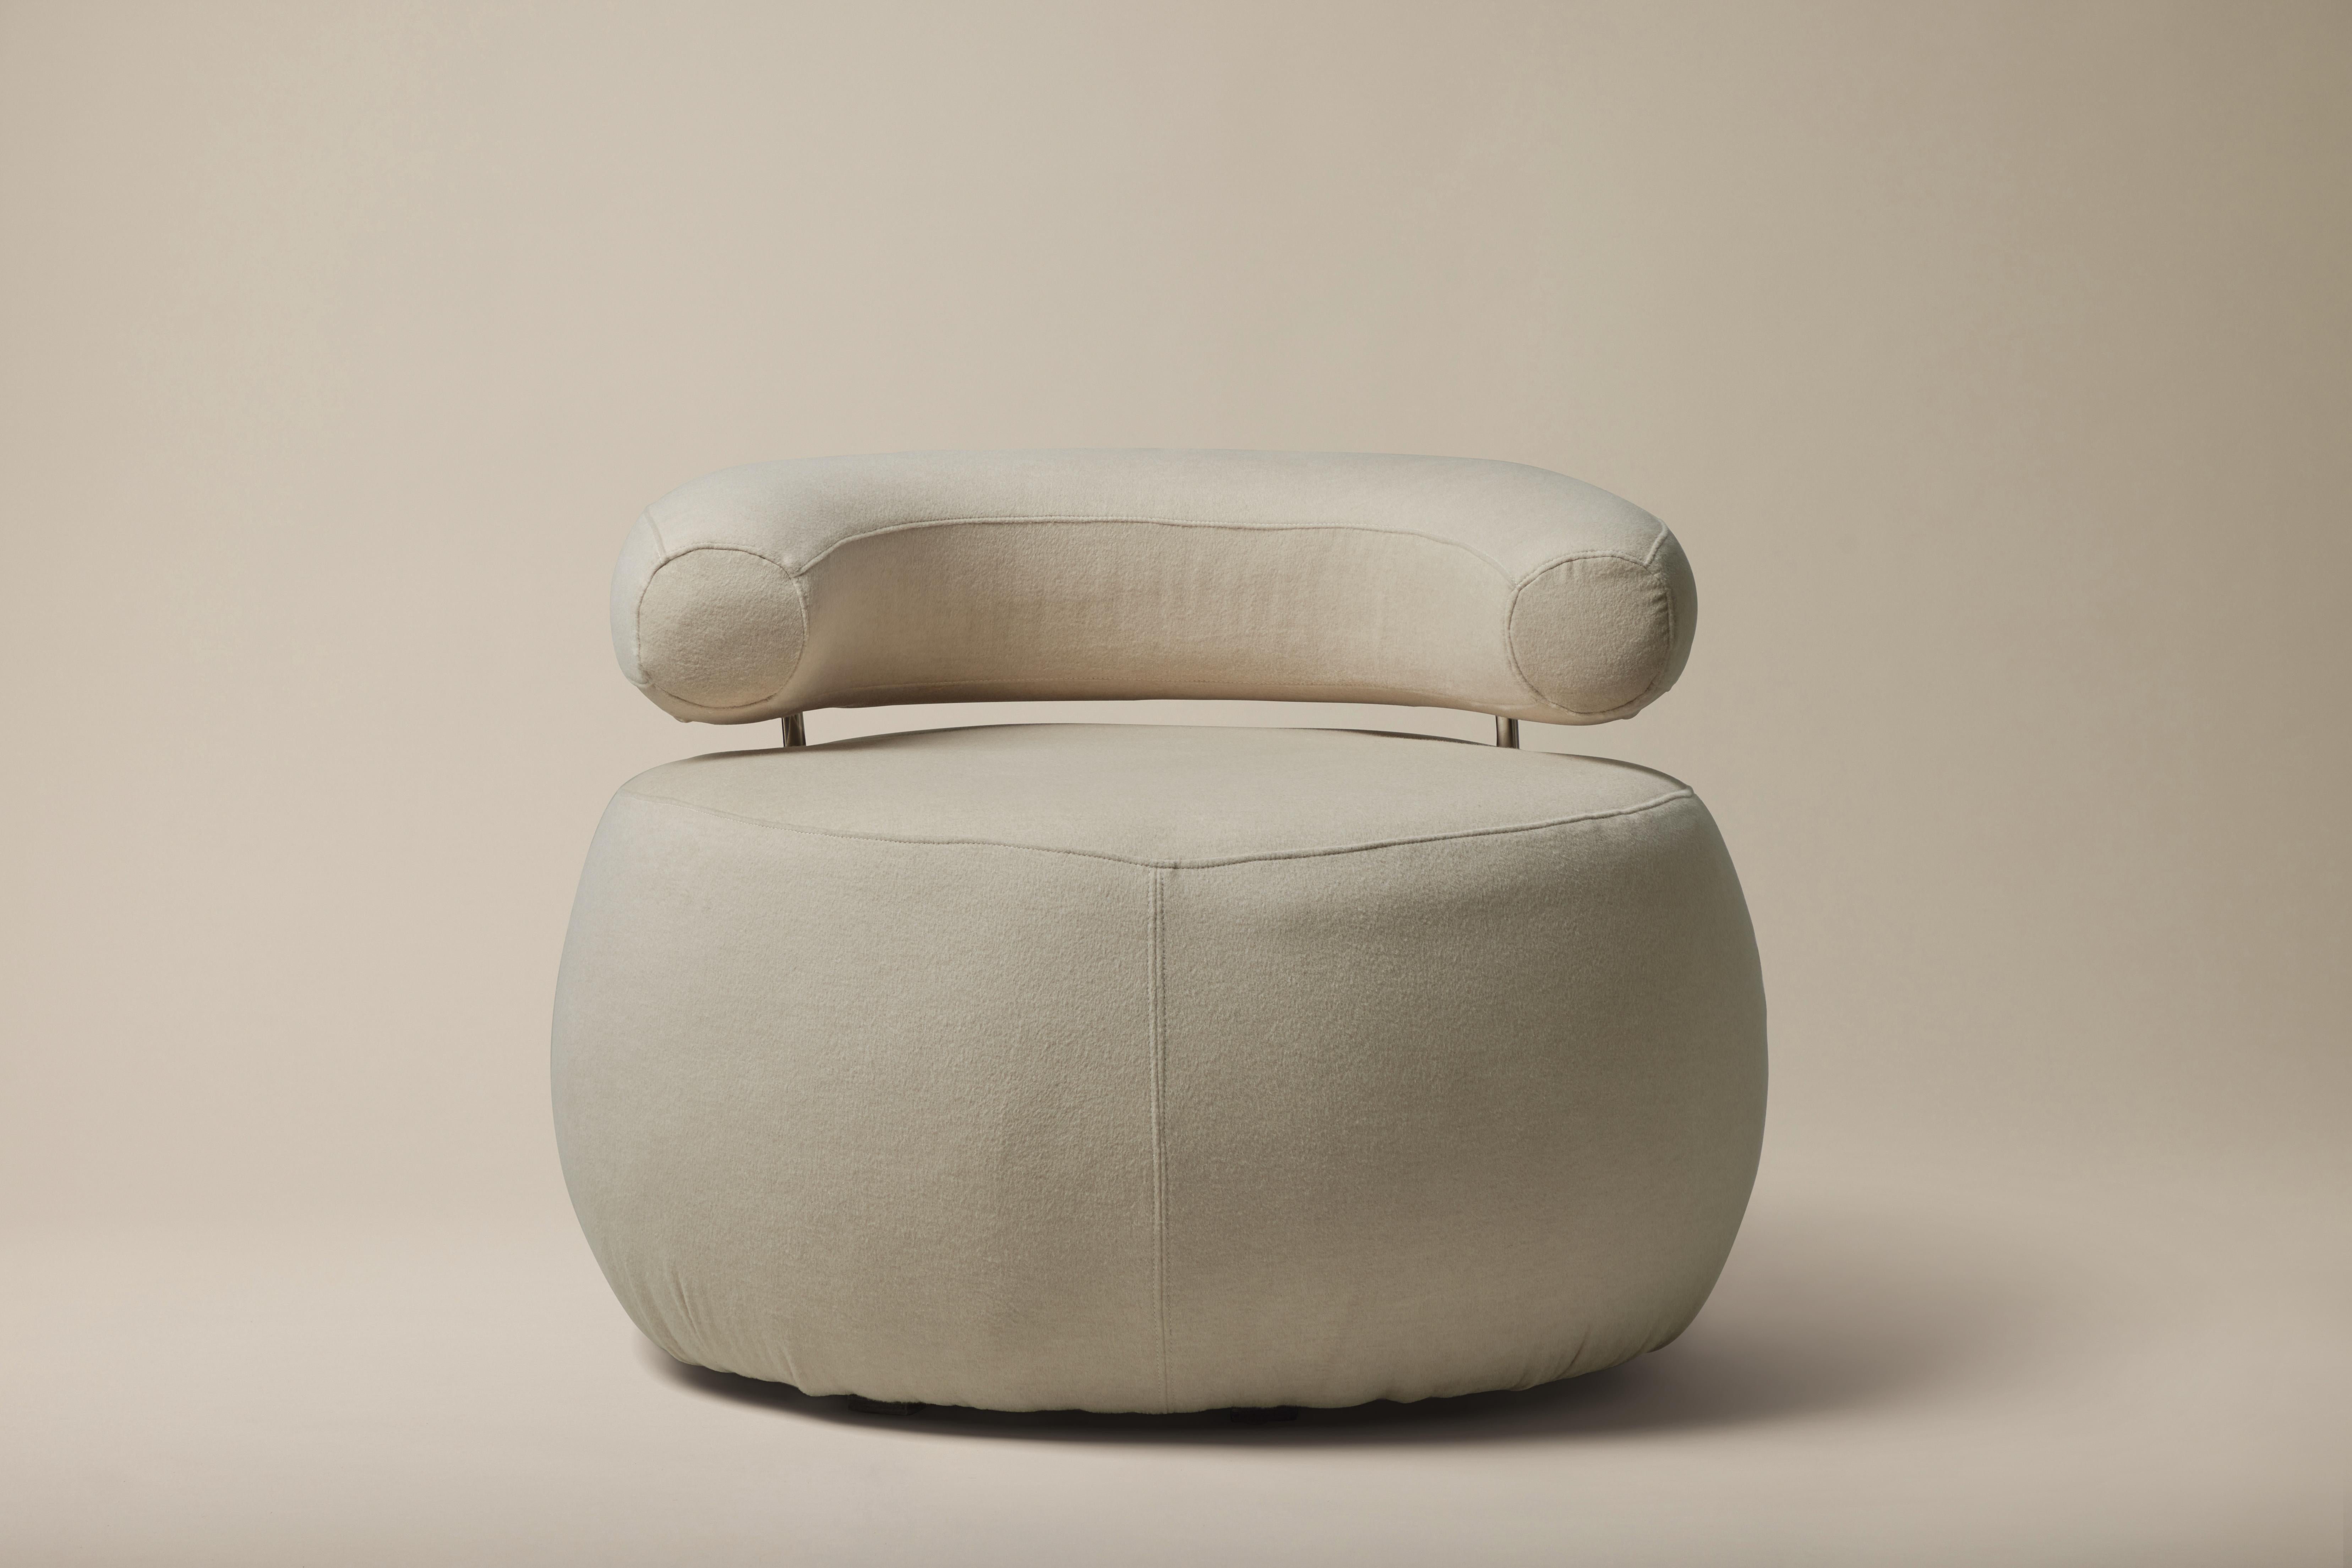 Atrio Vintage Roche Bobois Style Pouf Lounge Chair in Cashmere, 1970s In Excellent Condition For Sale In Culver City, CA